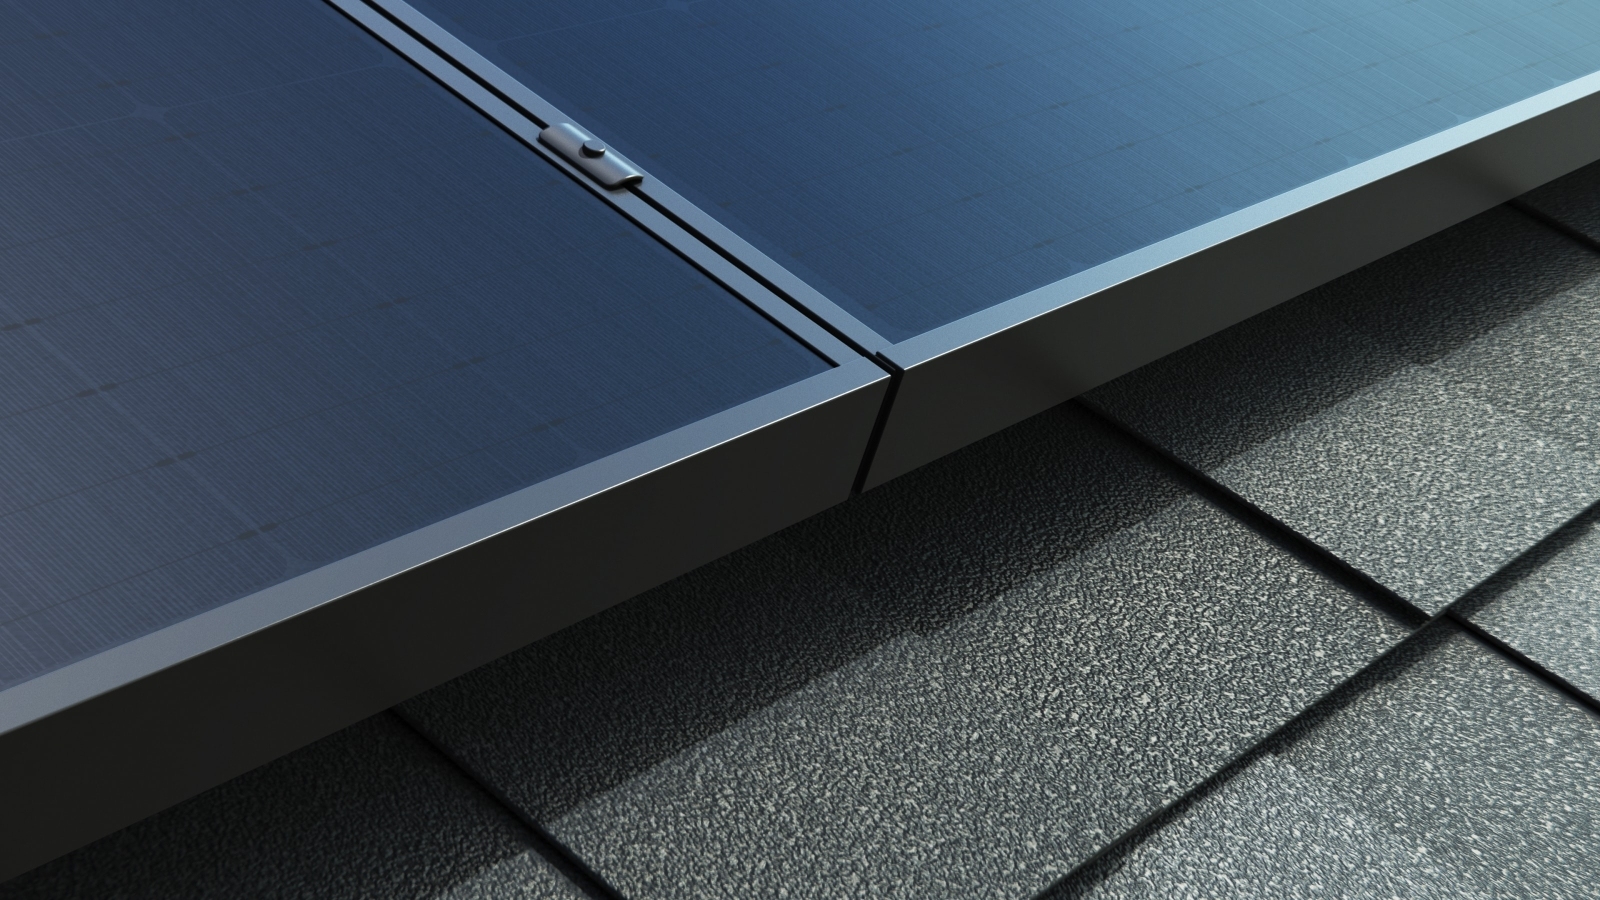 Close up view of solar panels installed on black shingled roof